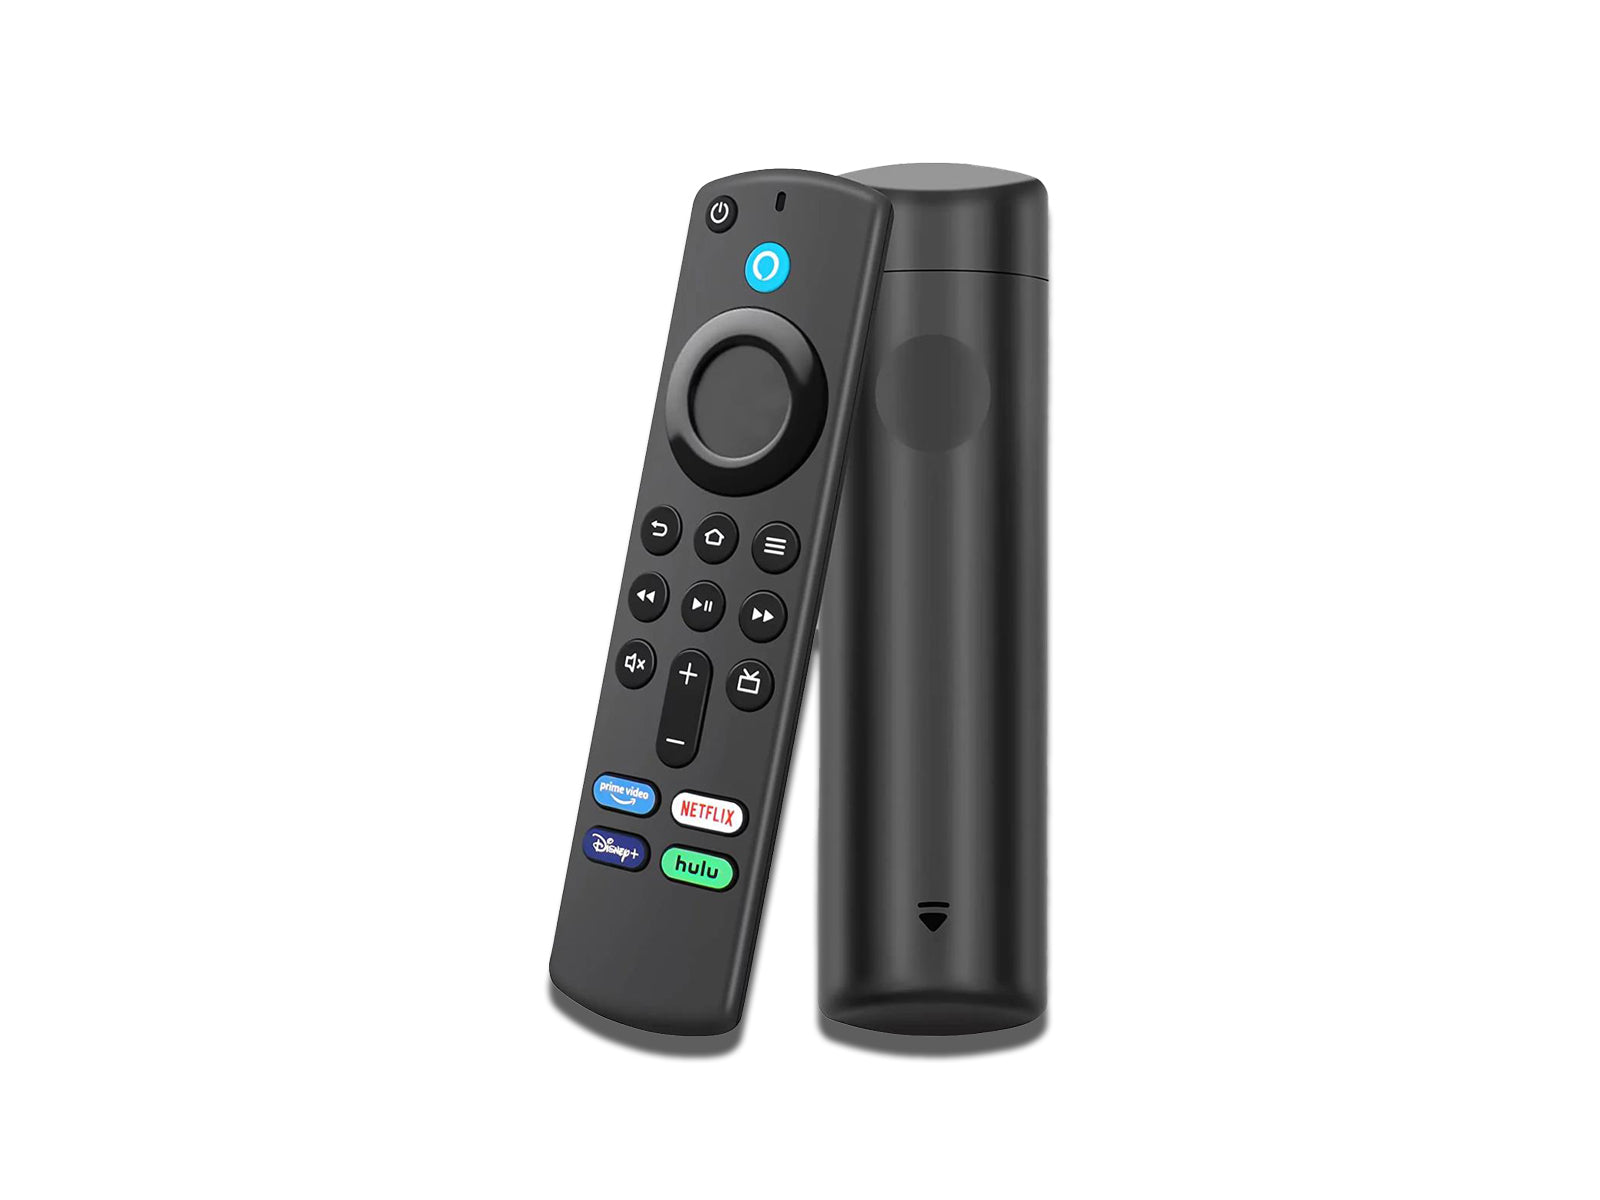 Back and front view image of the amazon fire stick replacement remote control on the white background